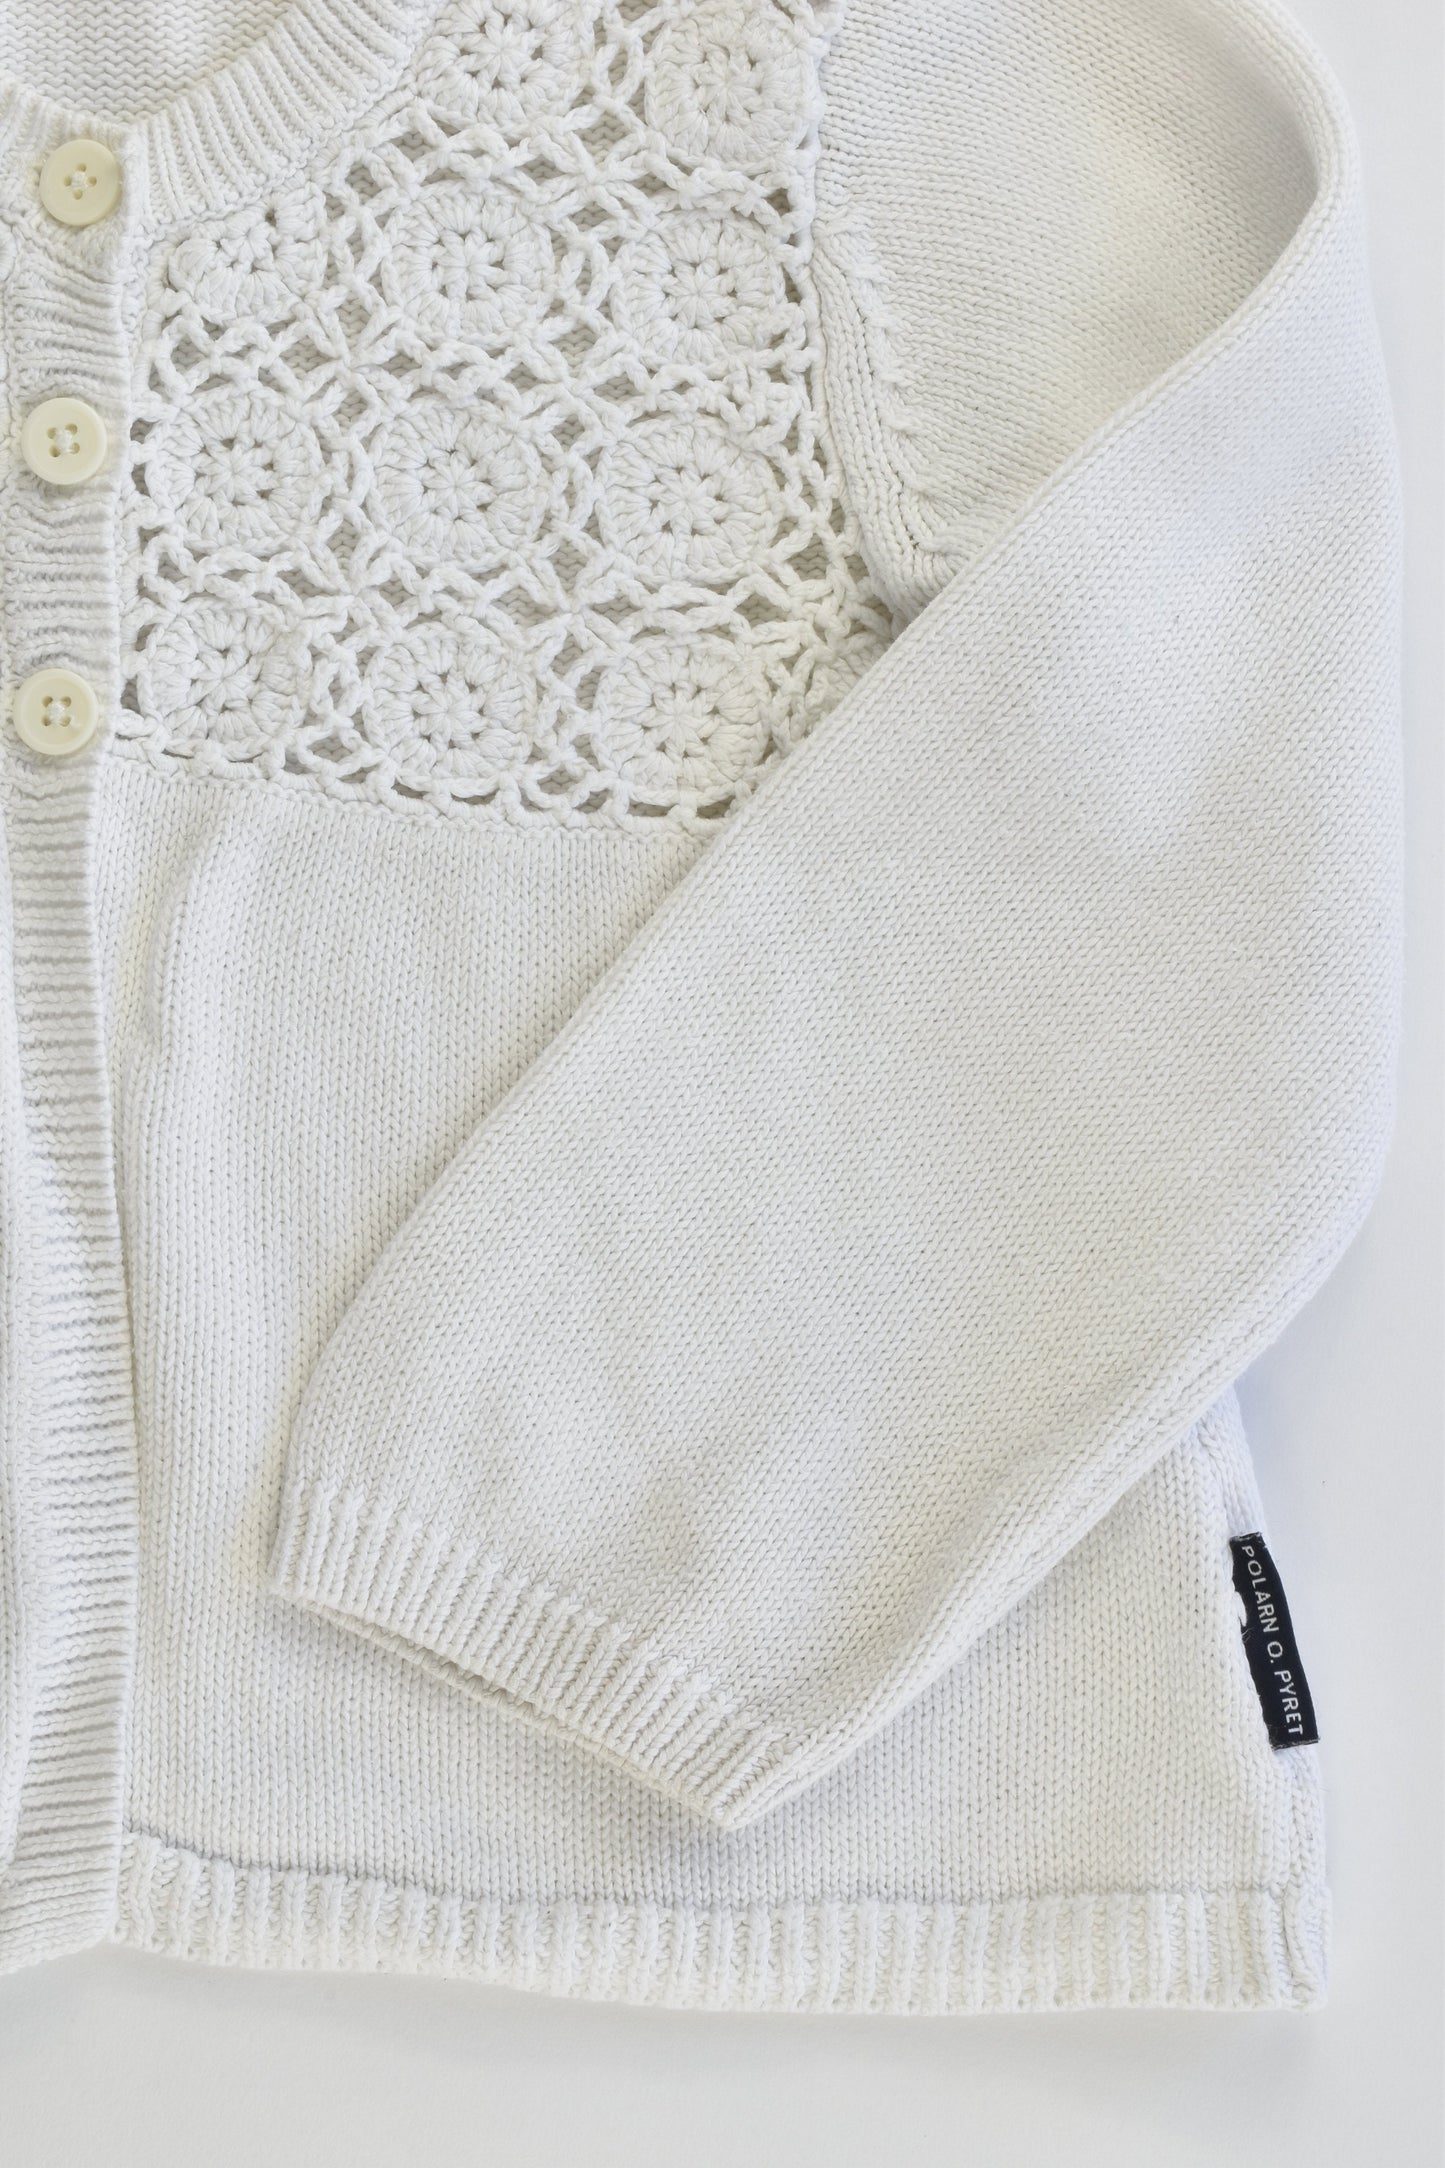 Polarn O. Pyret (Sweden) Size 3-4 (104 cm) Knitted Cardigan